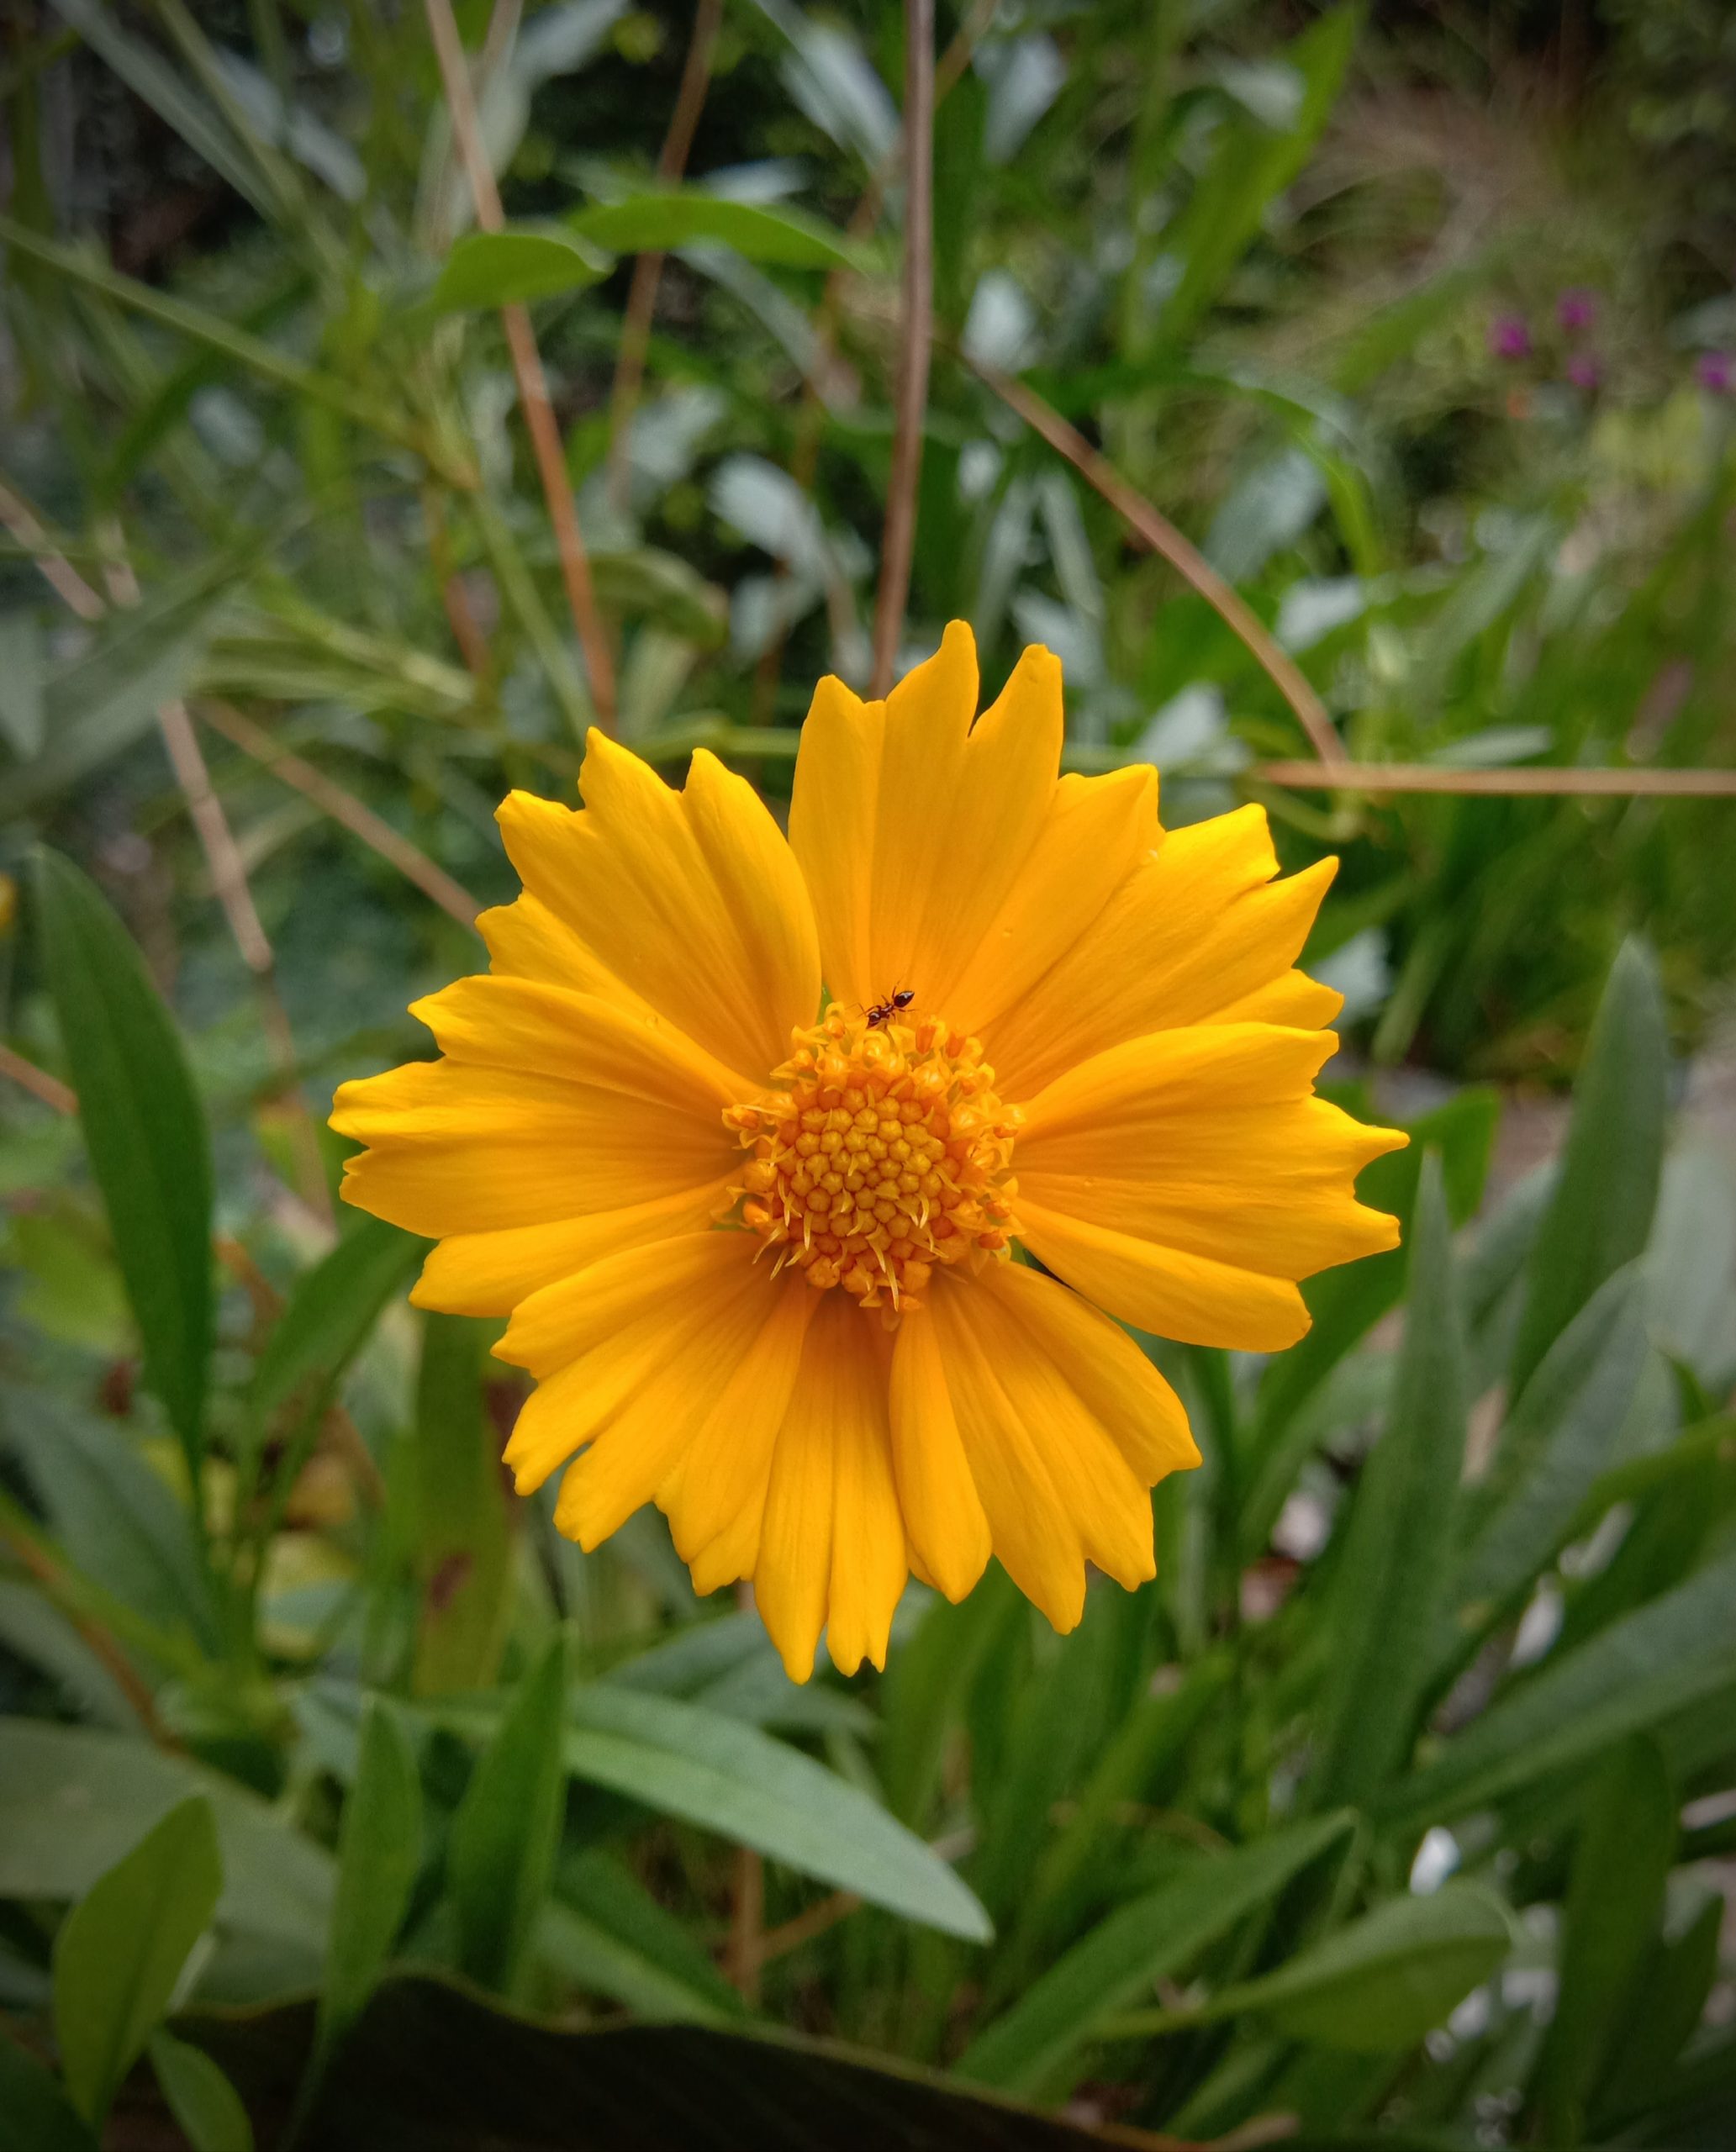 blooming yellow flower